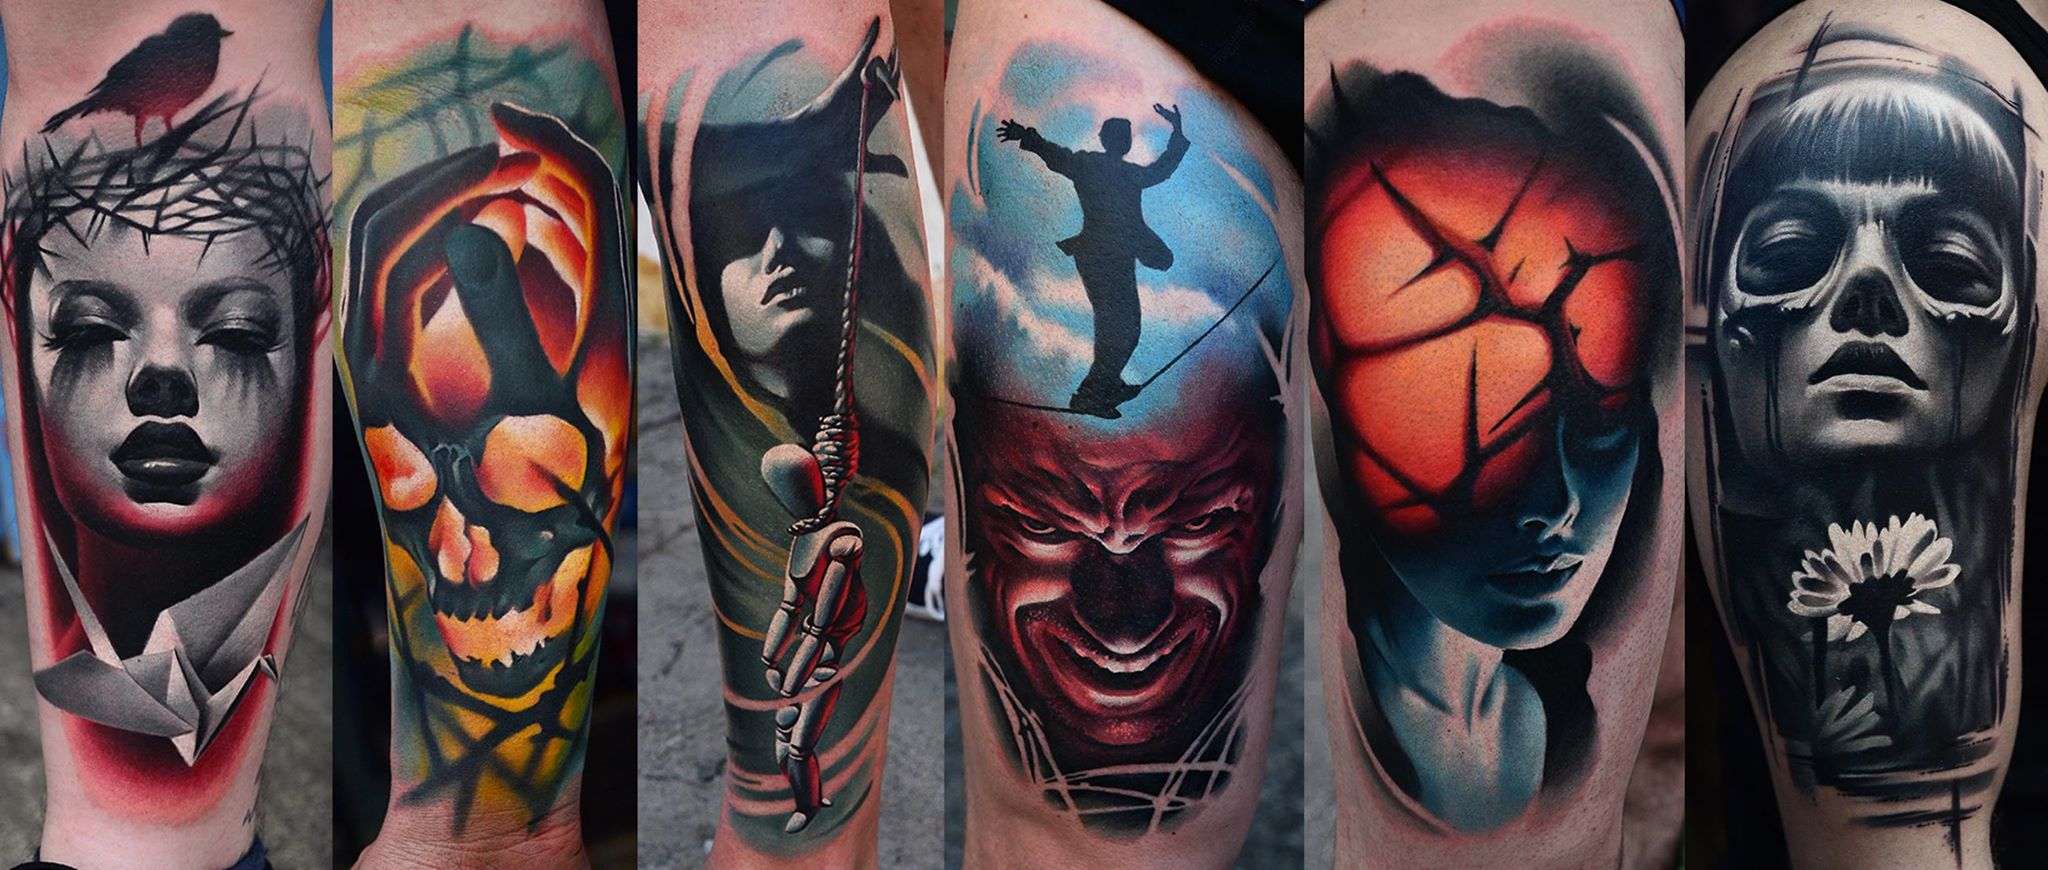 Fantastic tattoo work from . Pancho | iNKPPL